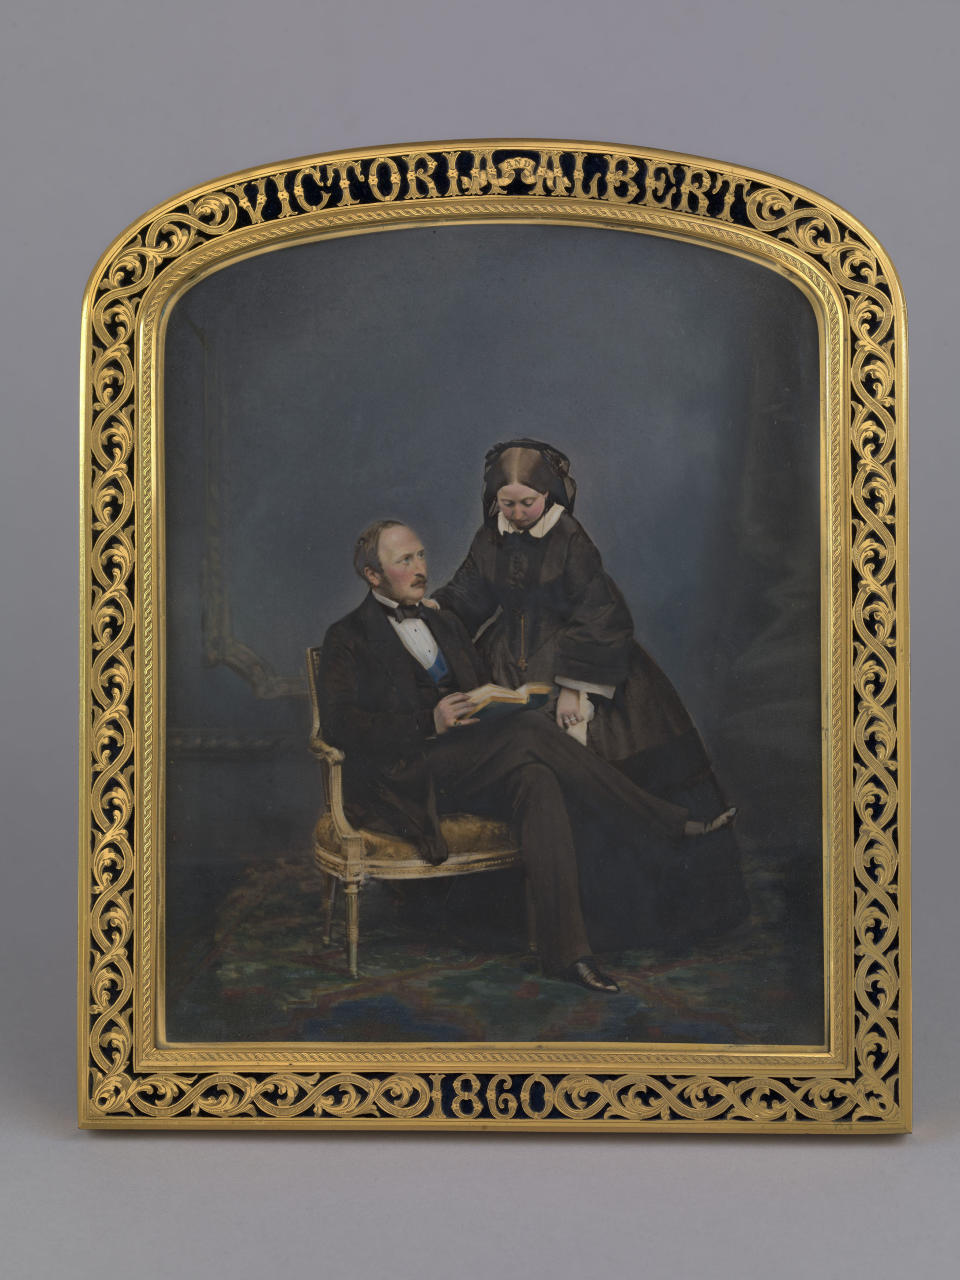 This image issued on Friday Aug. 23, 2019 by The Royal Collection shows a photograph of Queen Victoria and Prince Albert, 1860. In John Jabez Edwin Mayall's portrait of 1860, the Queen stands dutifully at her seated husband's side, her head bowed. This little-known version of the photograph, hand coloured and presented in a custom frame, was taken a year before Albert's untimely death in 1861. British royal documents, including images of Victoria’s leather-bound notebook, have been uploaded as part of thousands of documents and photos on the website www.albert.rct.uk that went online Friday to mark next week’s 200th anniversary of Albert’s birth. (The Royal Collection Trust via AP)